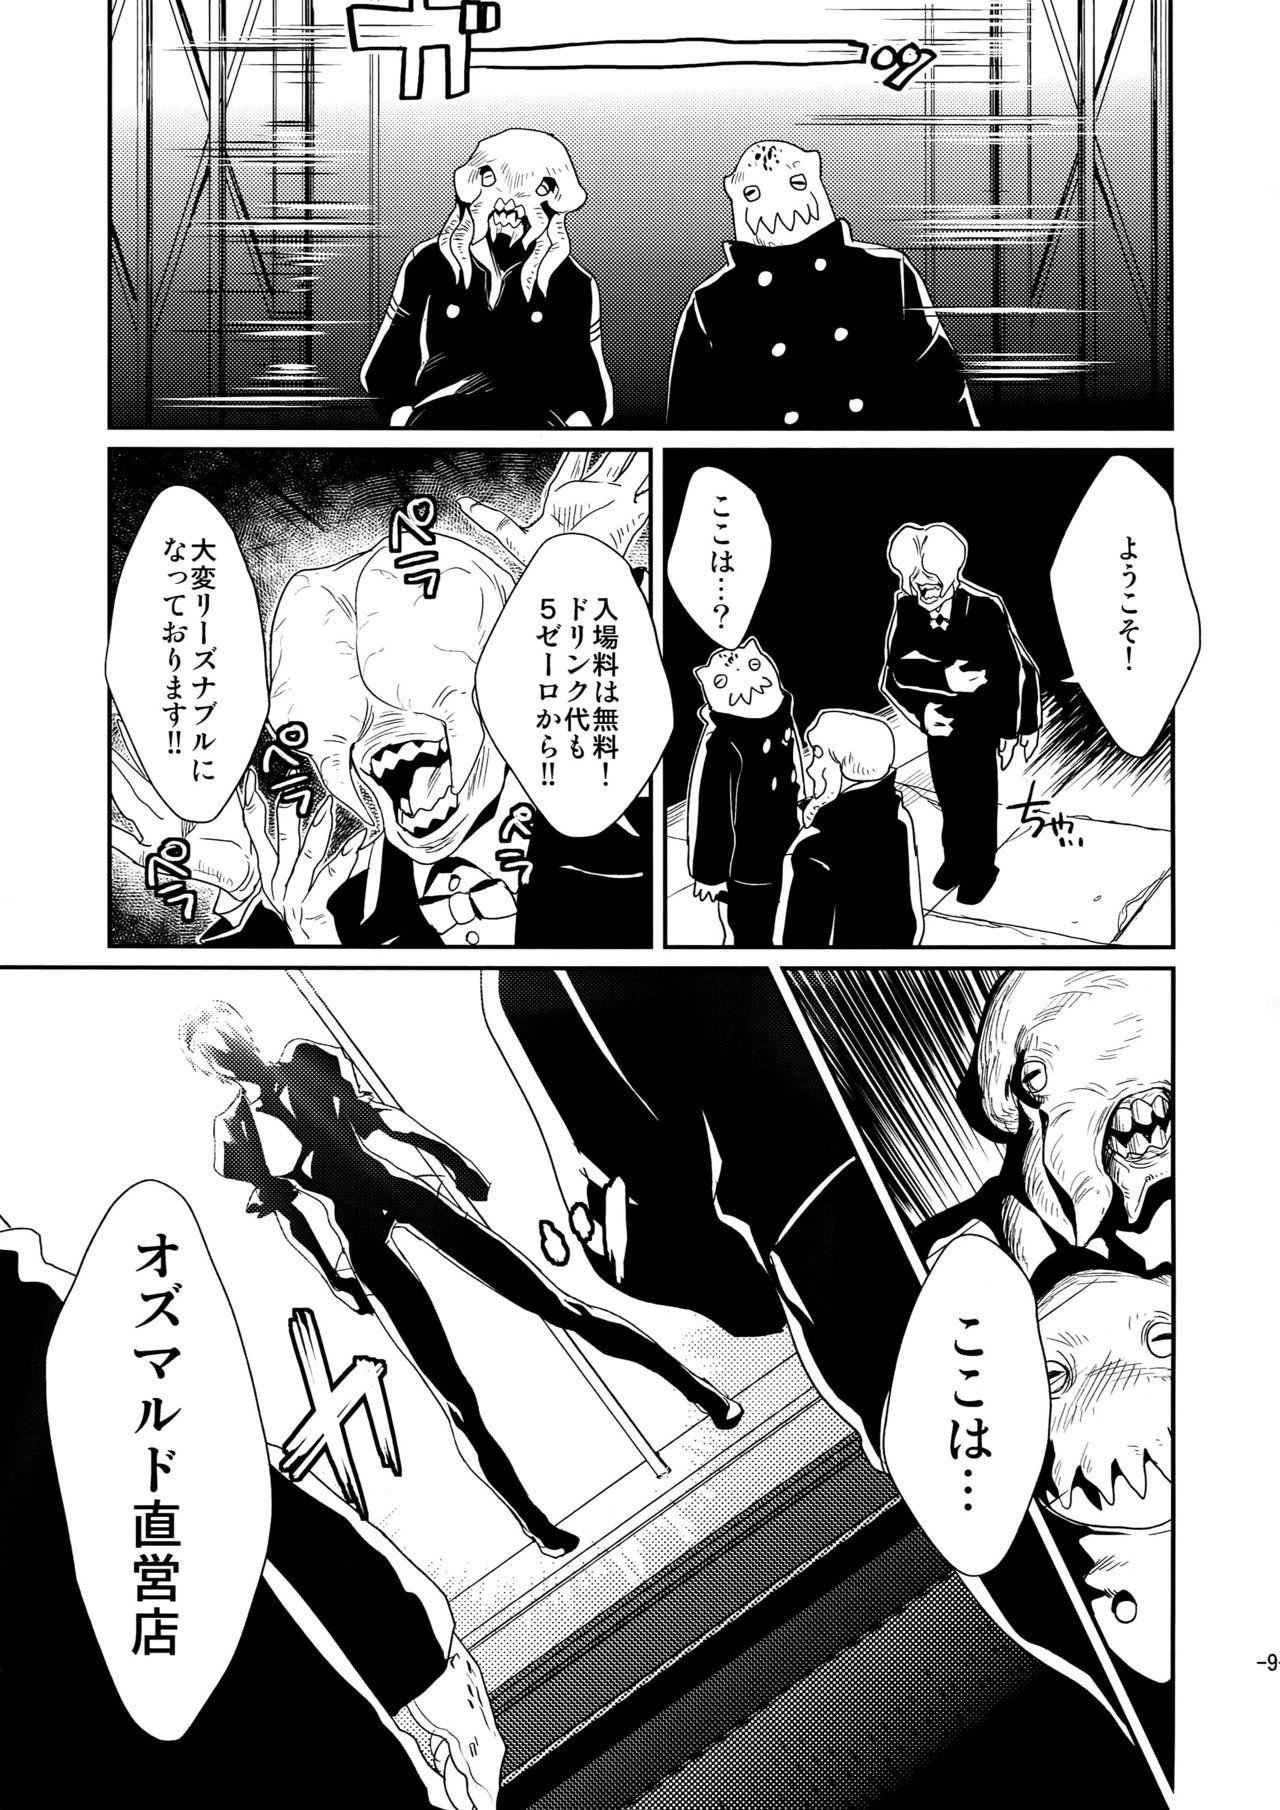 Ethnic CHEAP FICTION - Kekkai sensen Old And Young - Page 11